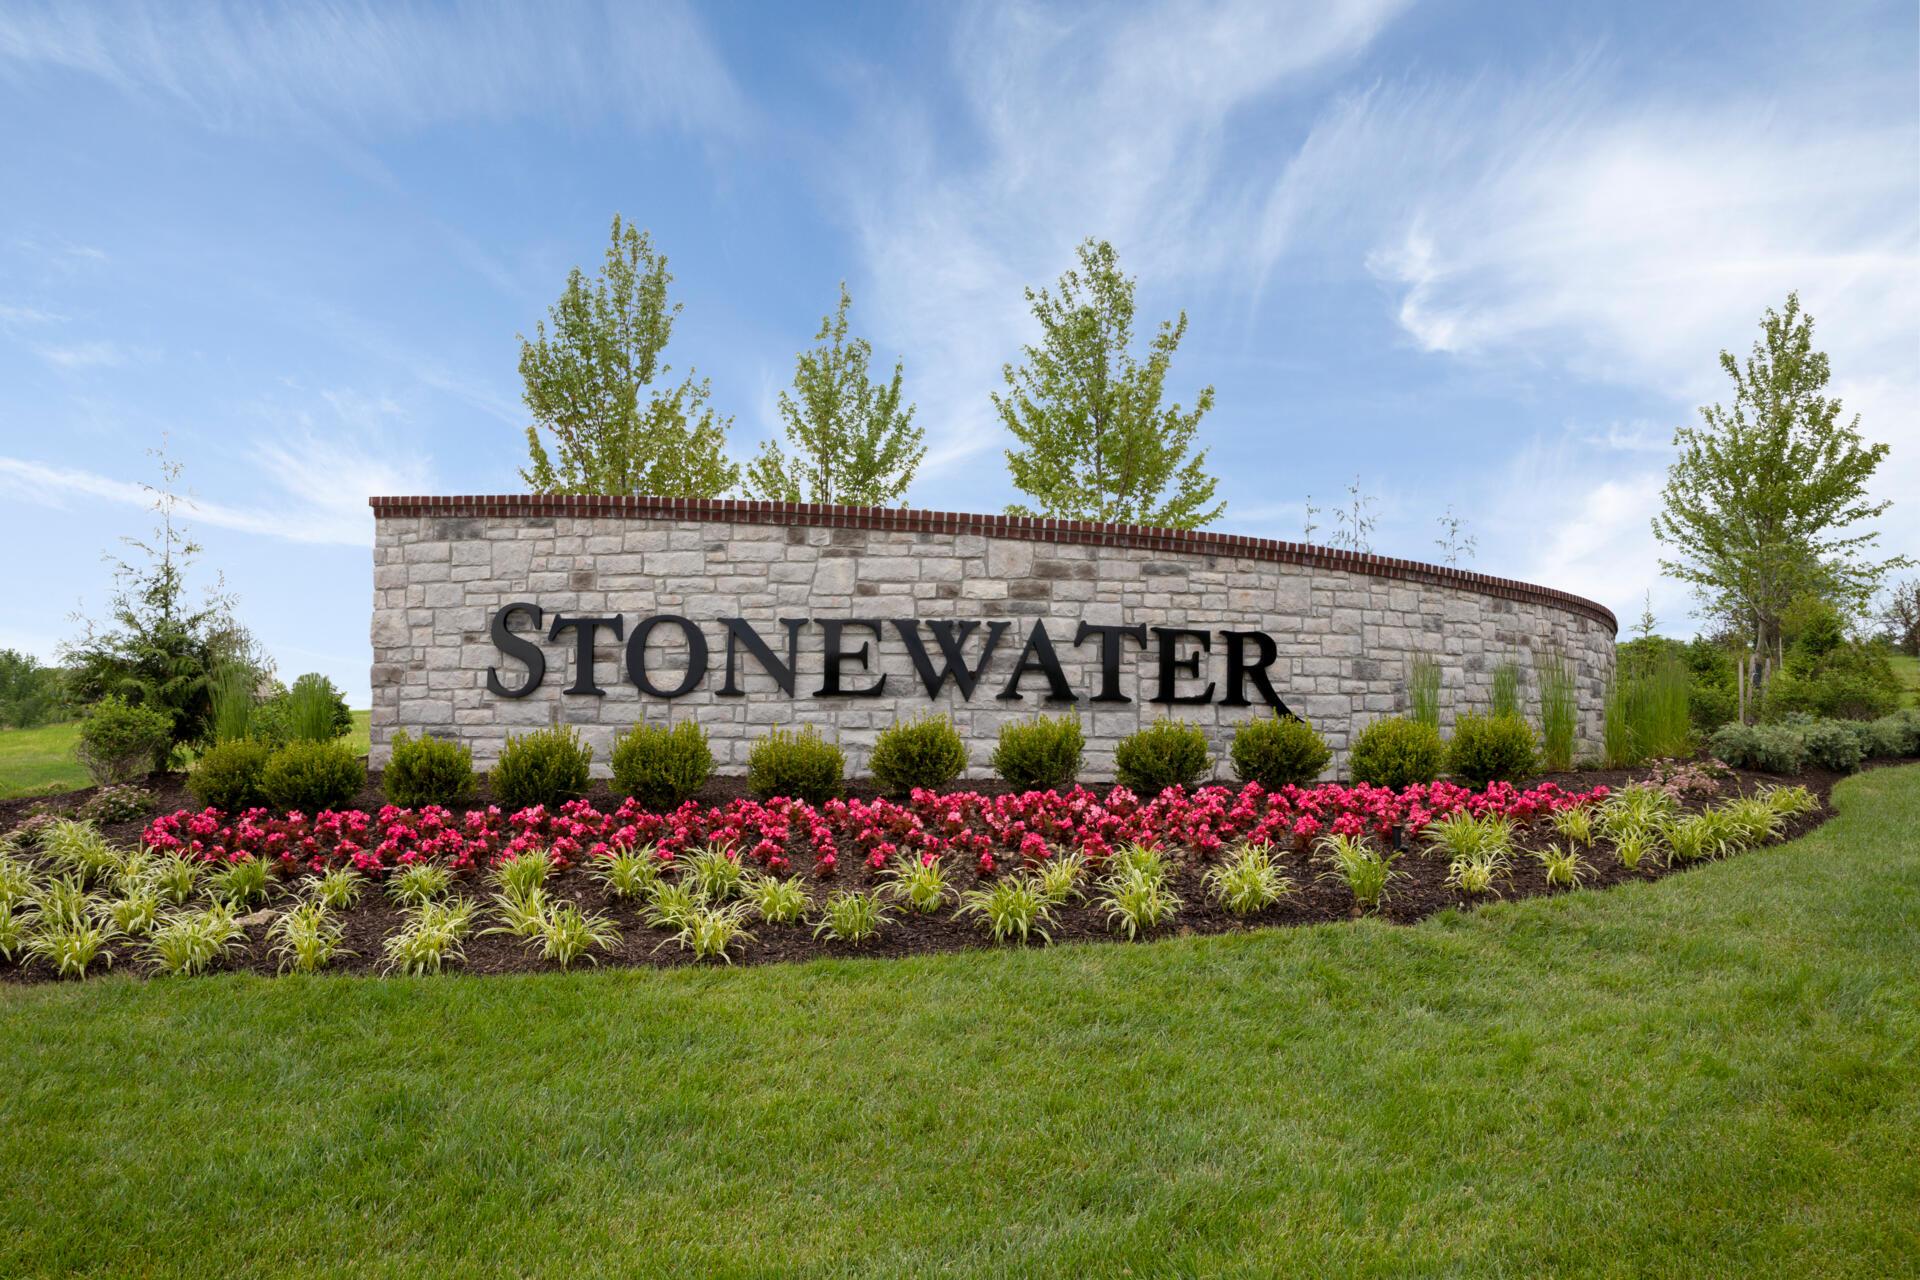 The Stonewater Entrance